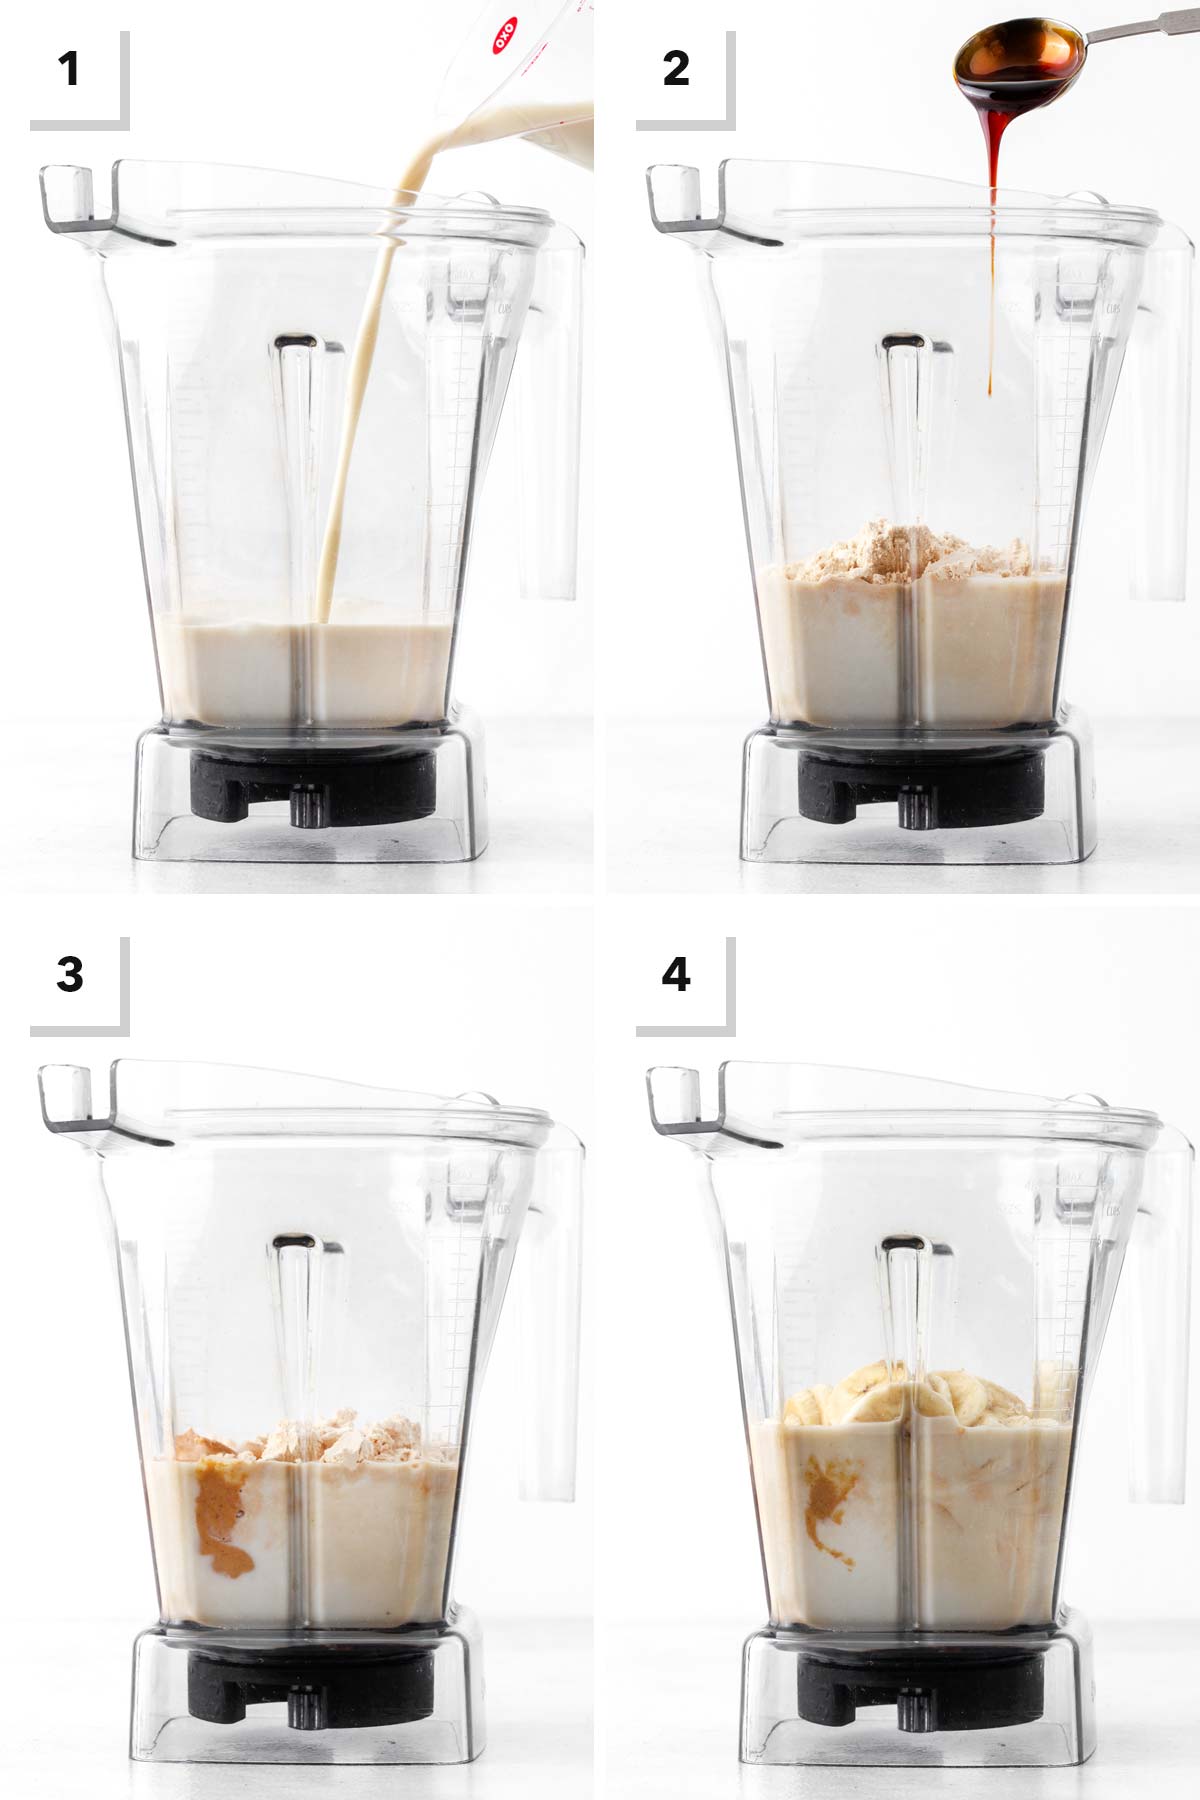 Steps for making a peanut butter banana protein shake.